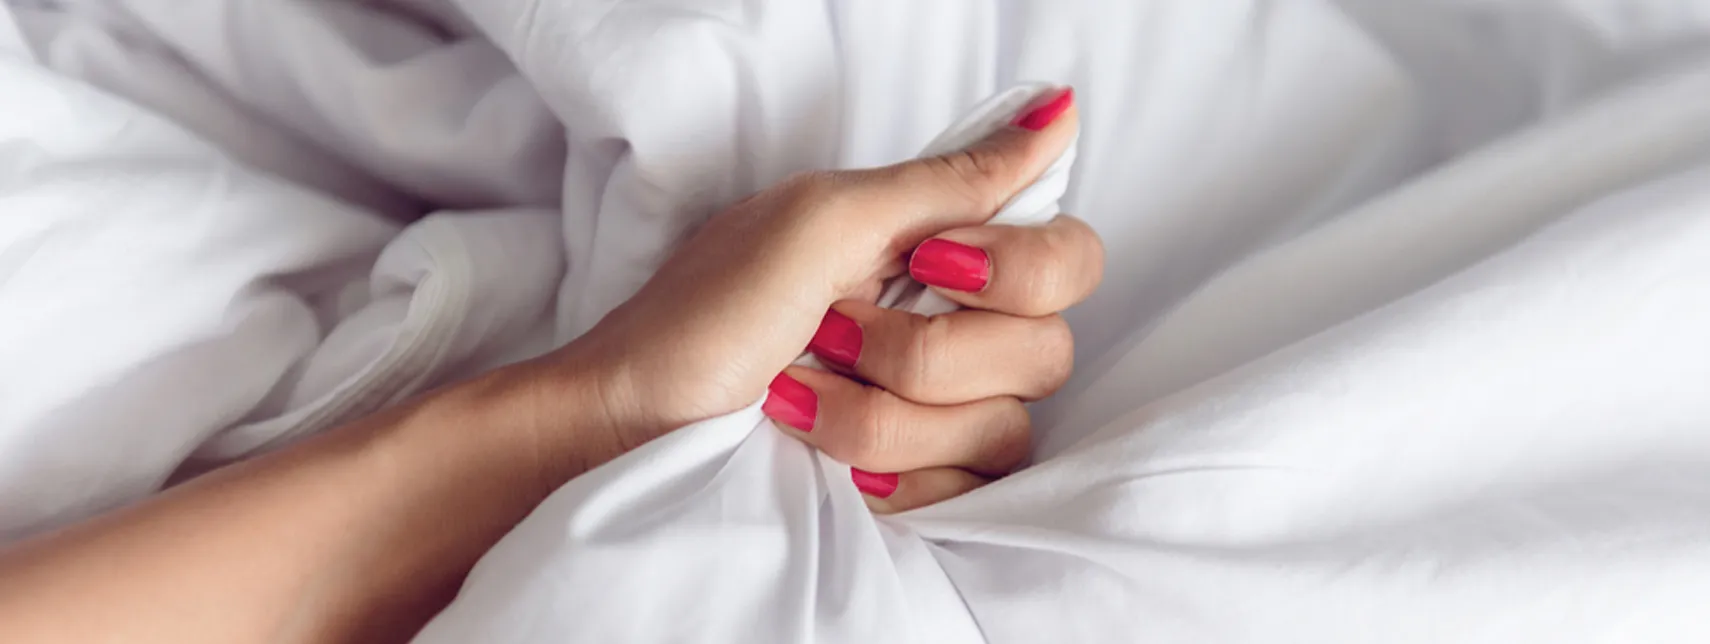 A close-up of a person's hands with pink nail polish, clutching a white fabric, possibly a bedsheet, suggesting a moment of emotion or tension discussed during a consultation with a Sexual Health Expert